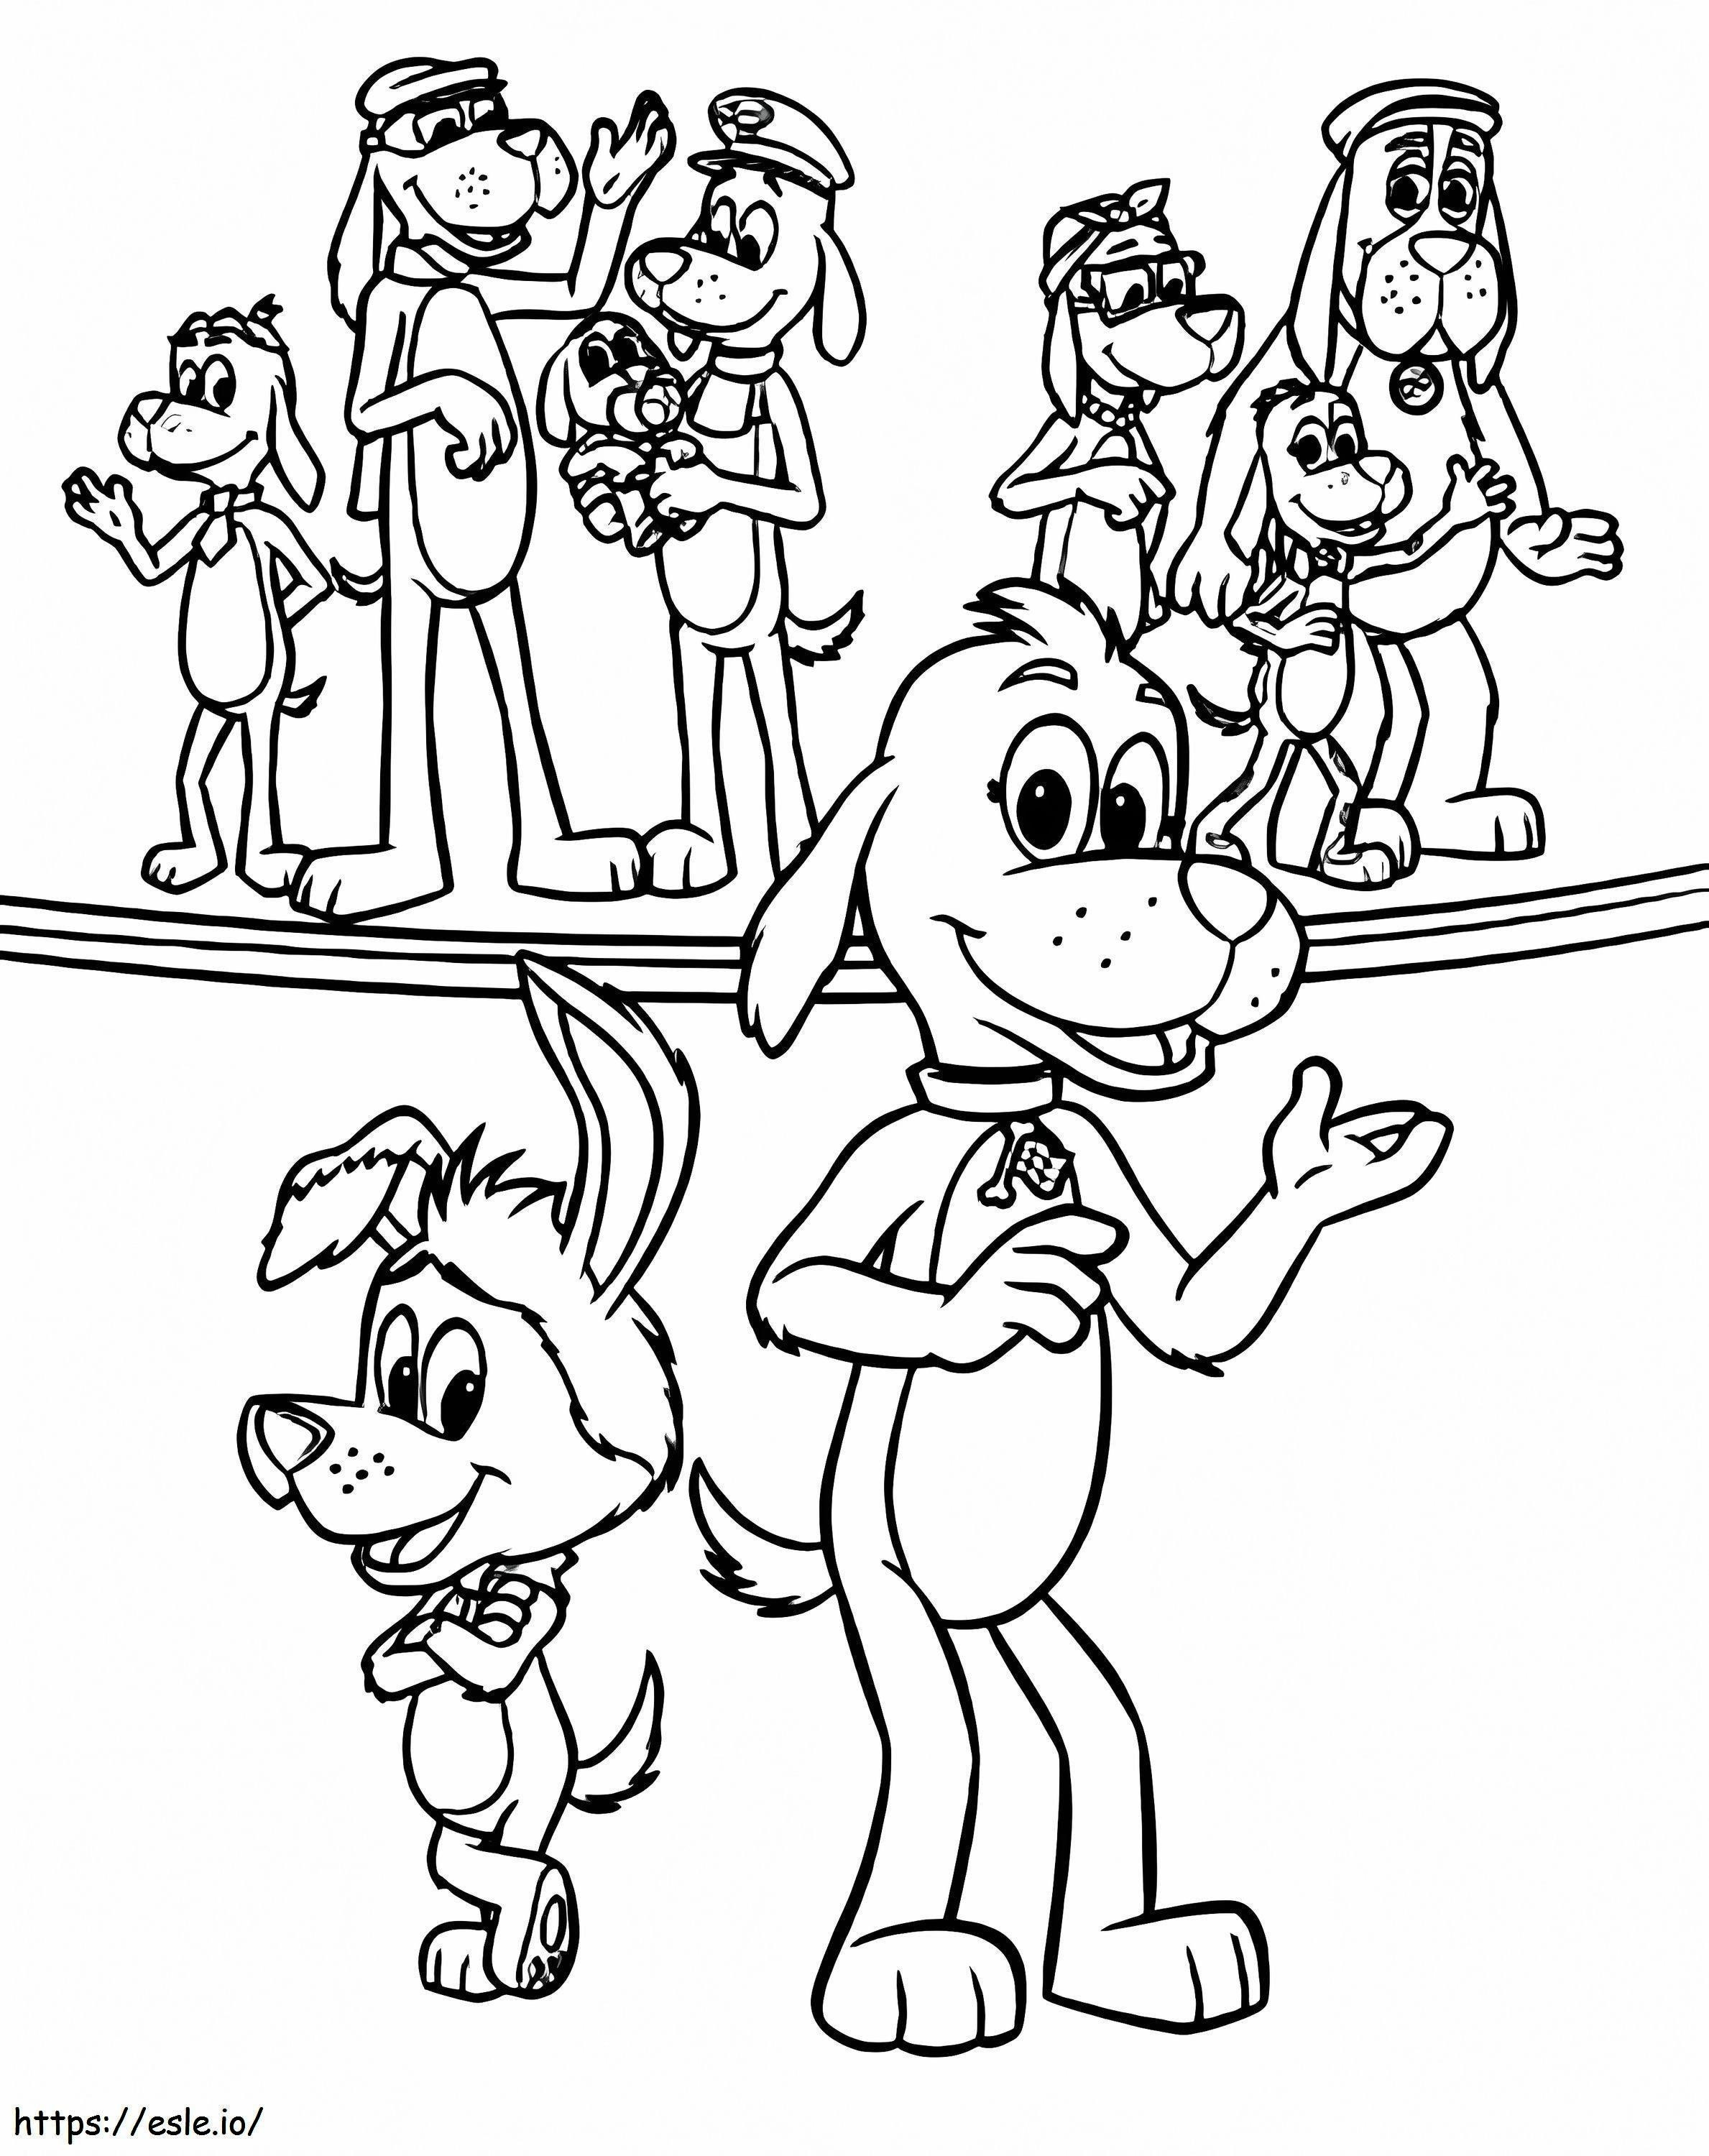 Go Dog Go 7 coloring page